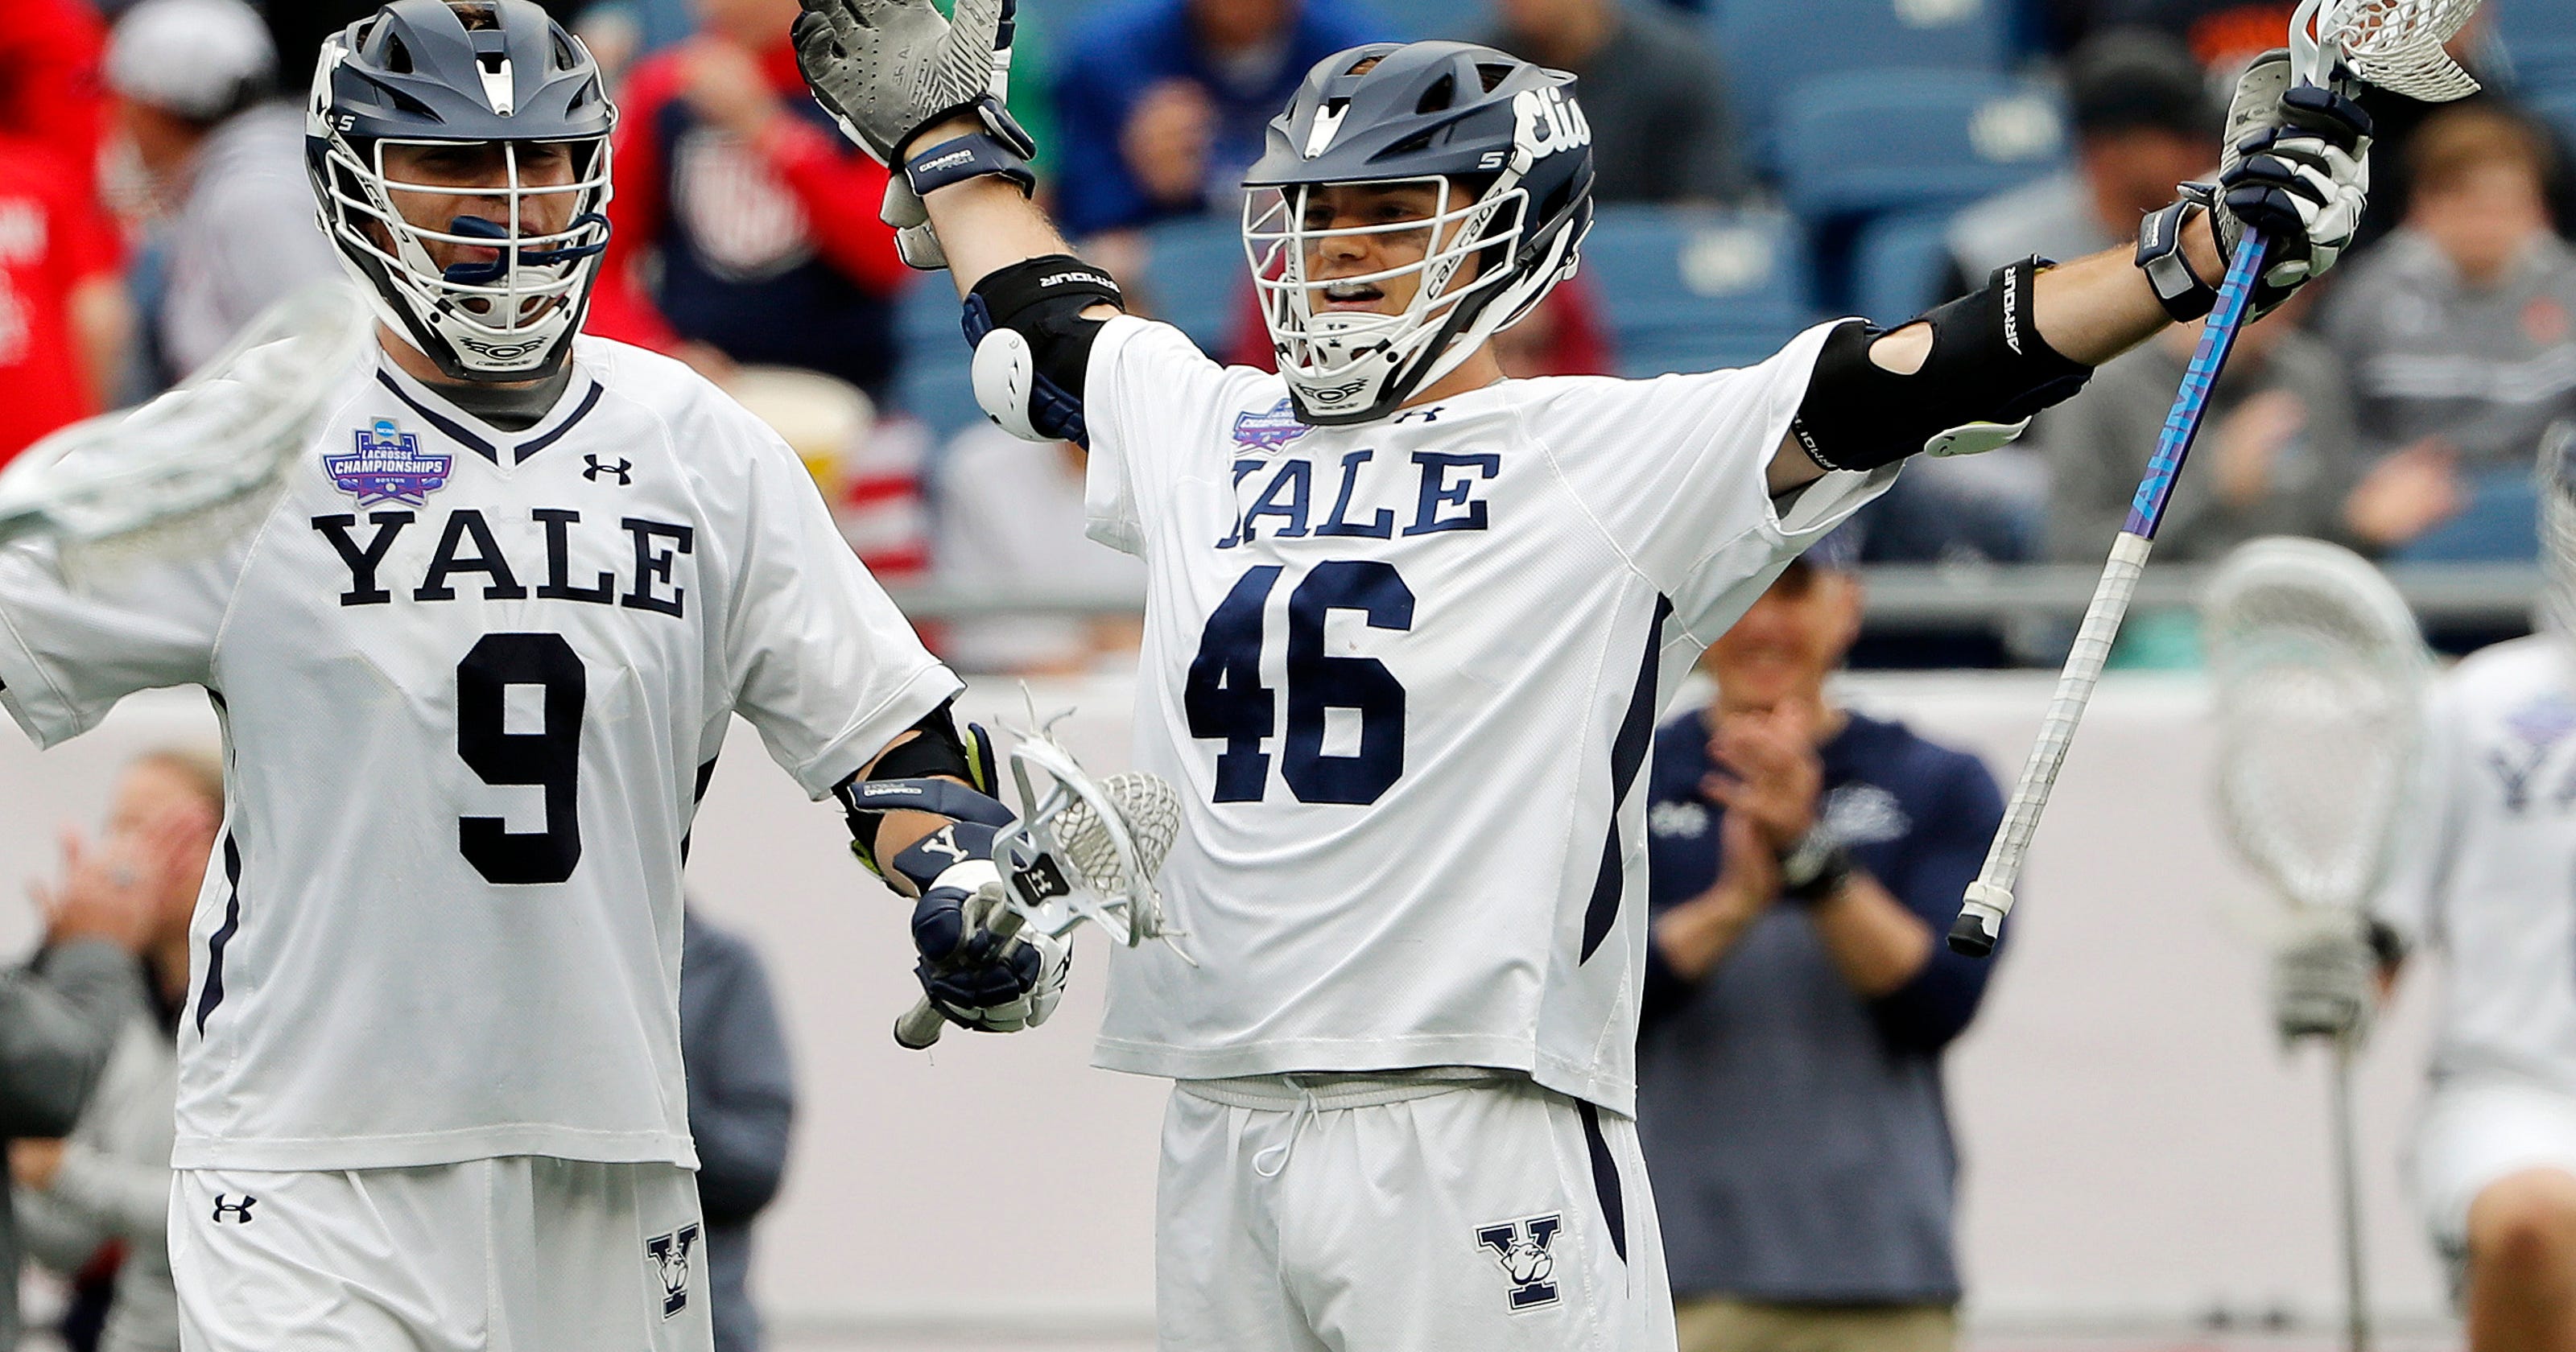 Yale wins first NCAA lacrosse title with defeat of Duke